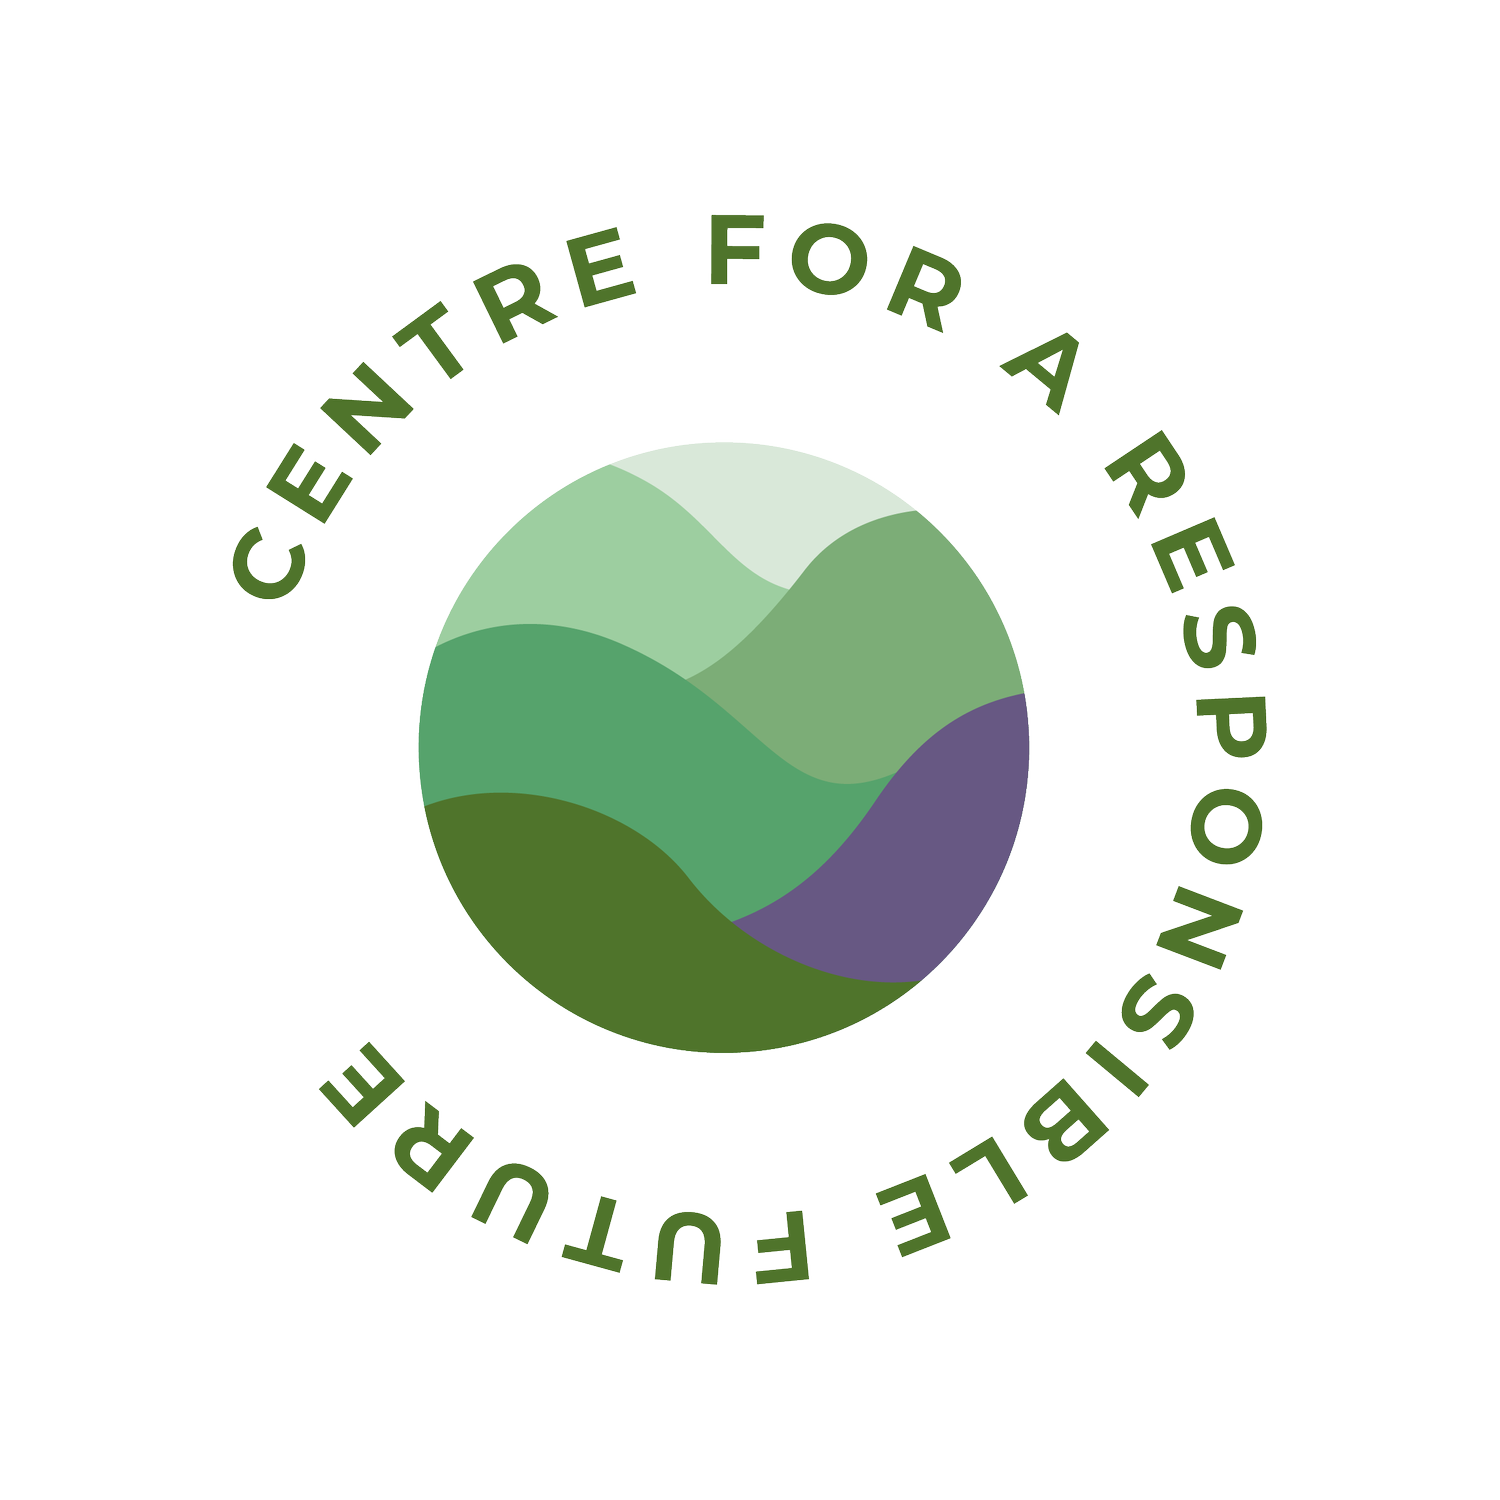 Centre for a Responsible Future